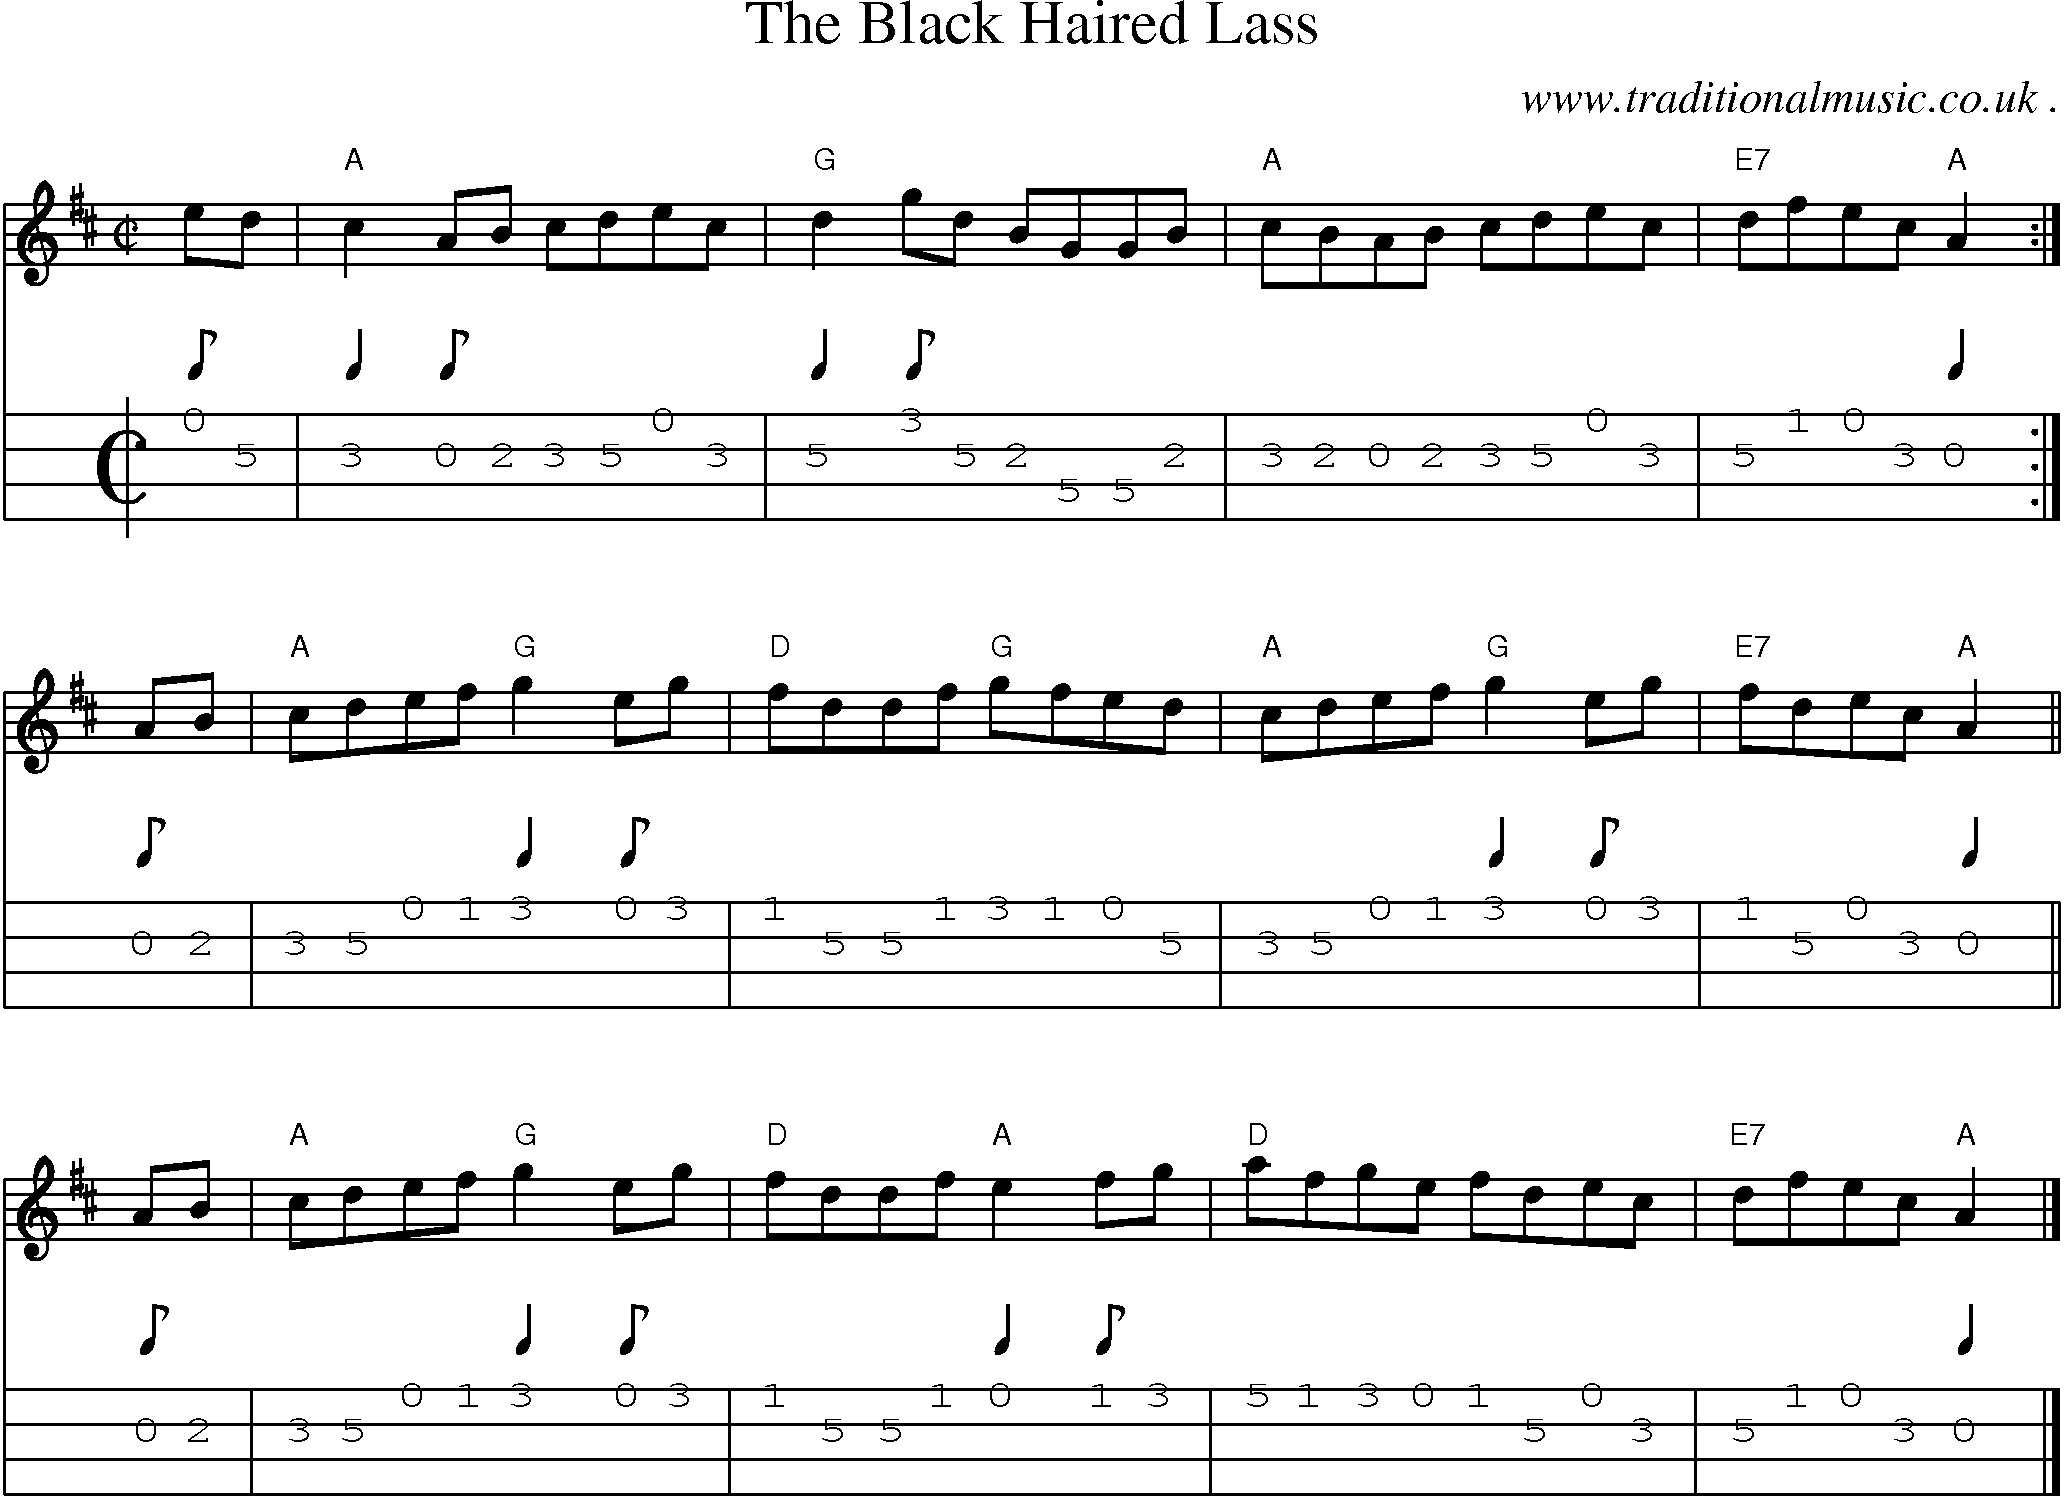 Sheet-music  score, Chords and Mandolin Tabs for The Black Haired Lass